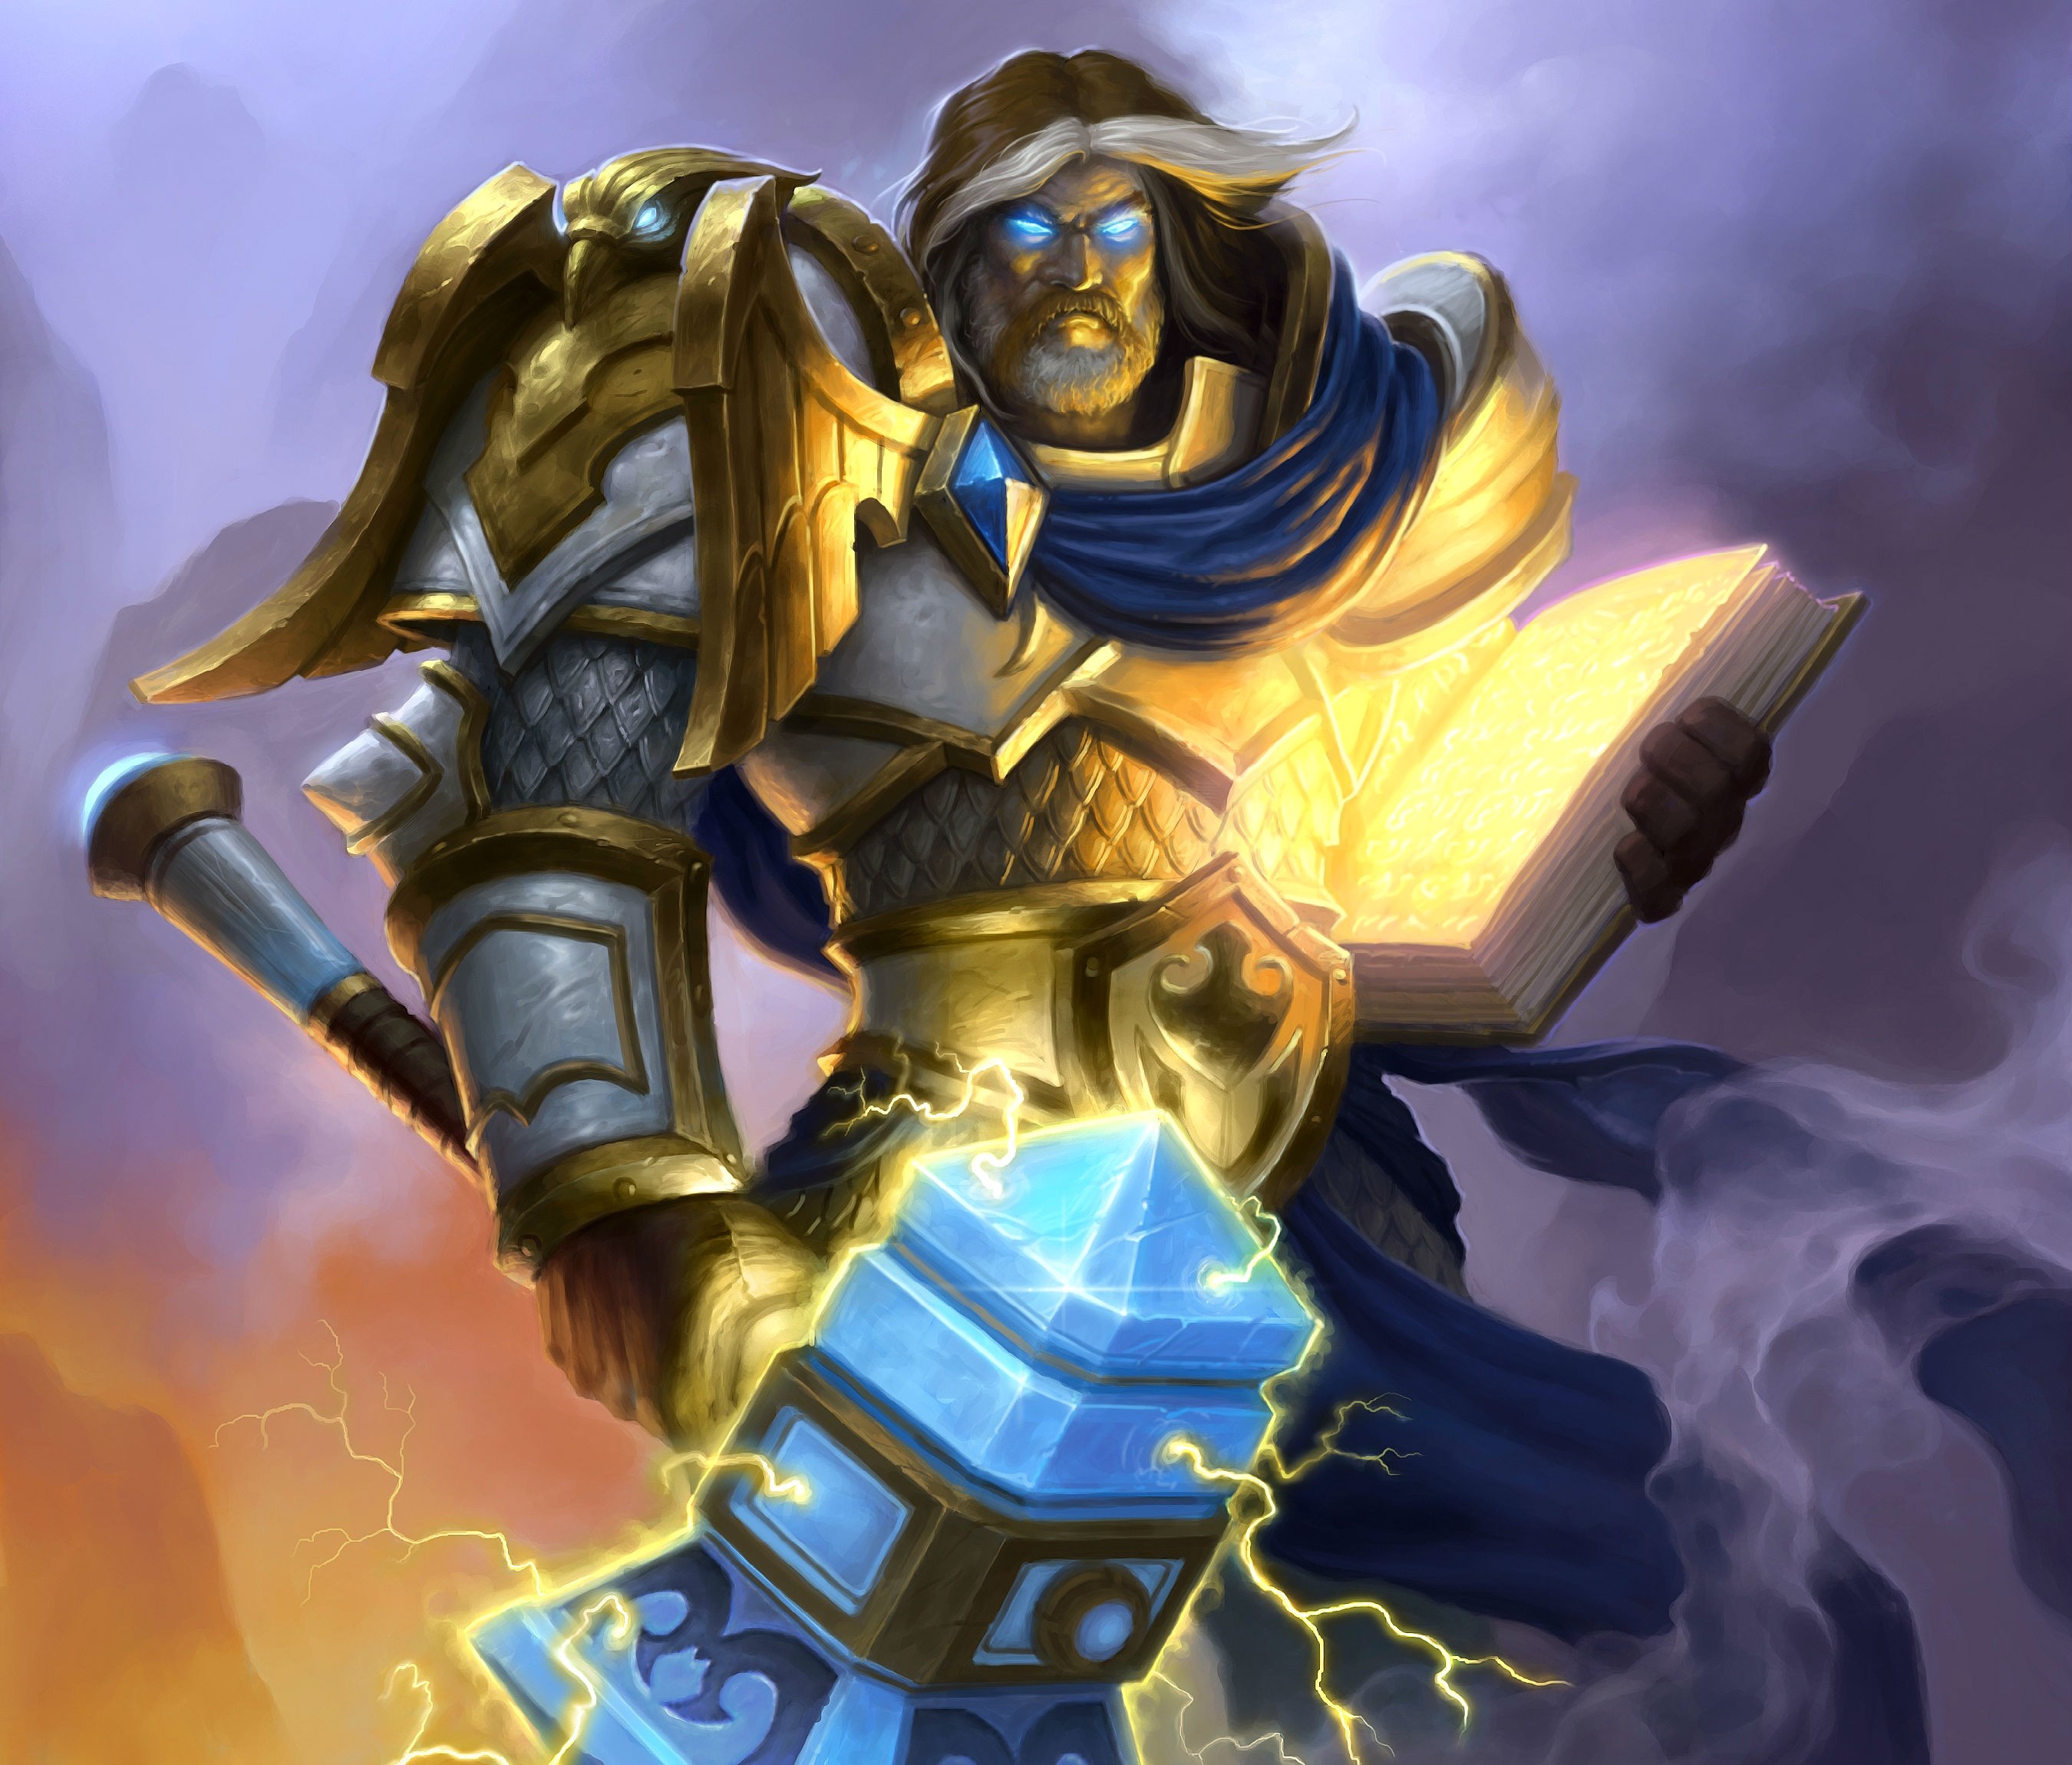 General 2700x2300 video games Hearthstone: Heroes of Warcraft Uther the Lightbringer PC gaming hammer glowing eyes video game men video game characters